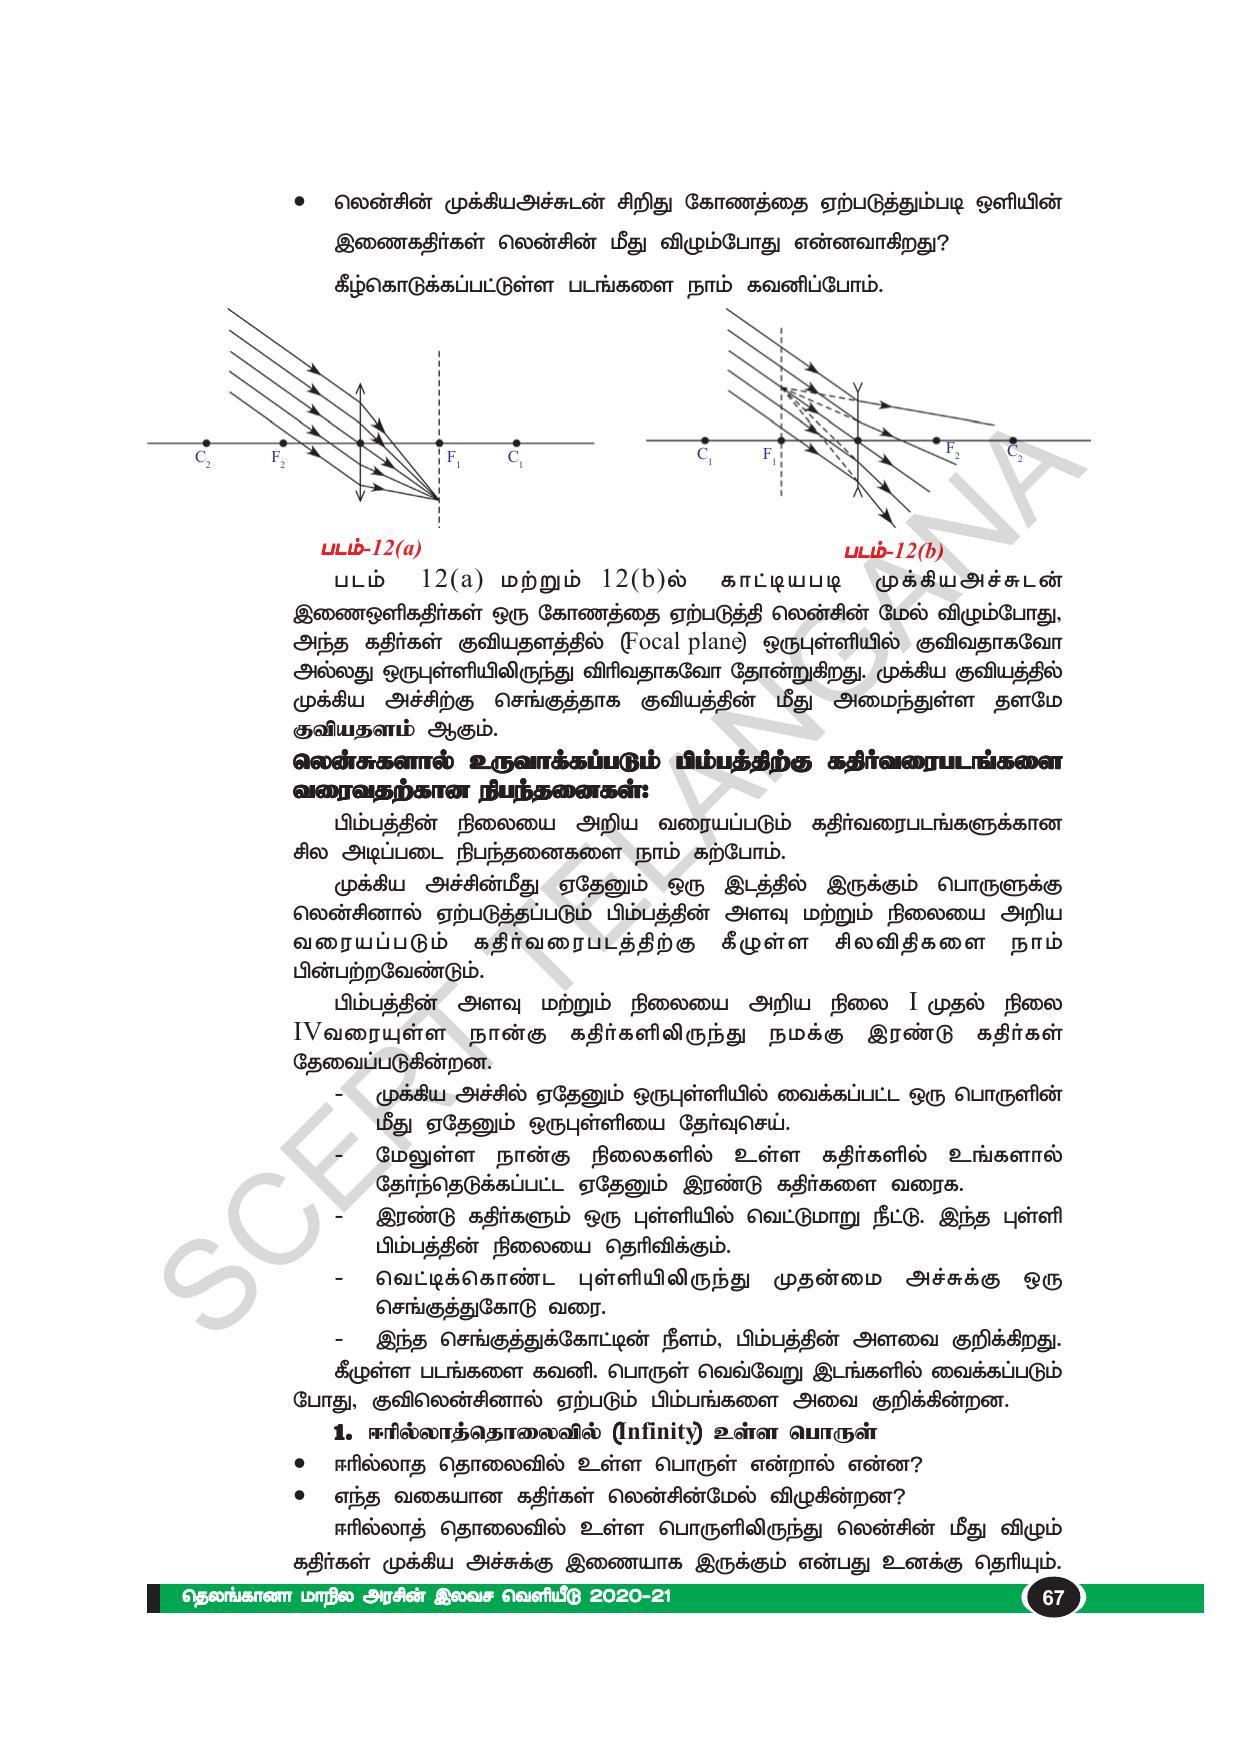 TS SCERT Class 10 Physical Science(Tamil Medium) Text Book - Page 79